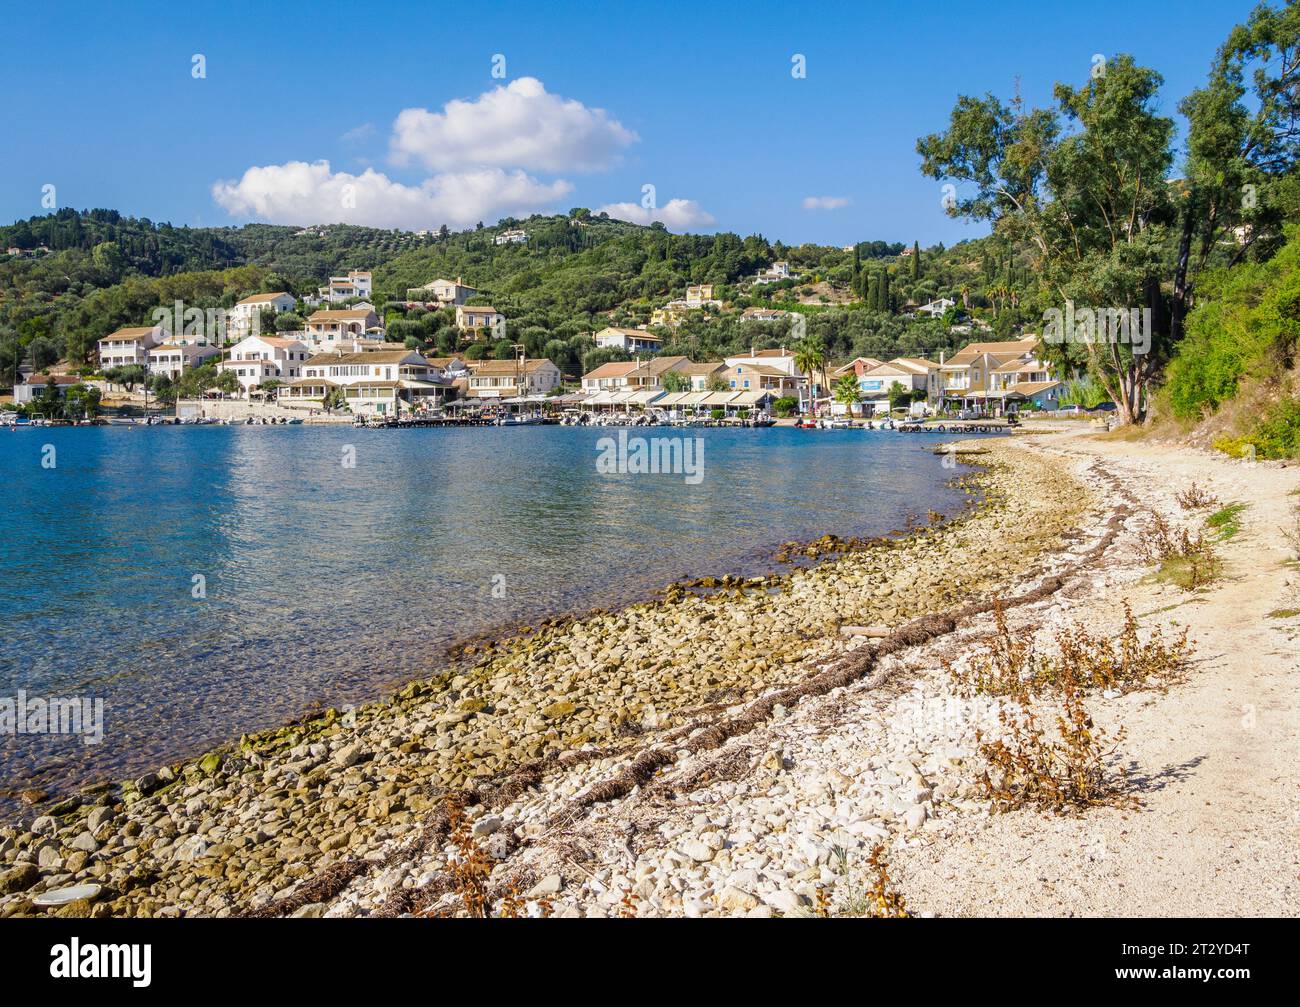 The small fishing village and holiday destination of Agio Stefanos on the north-east coast of Corfu in the Ionian Islands of Greece Stock Photo